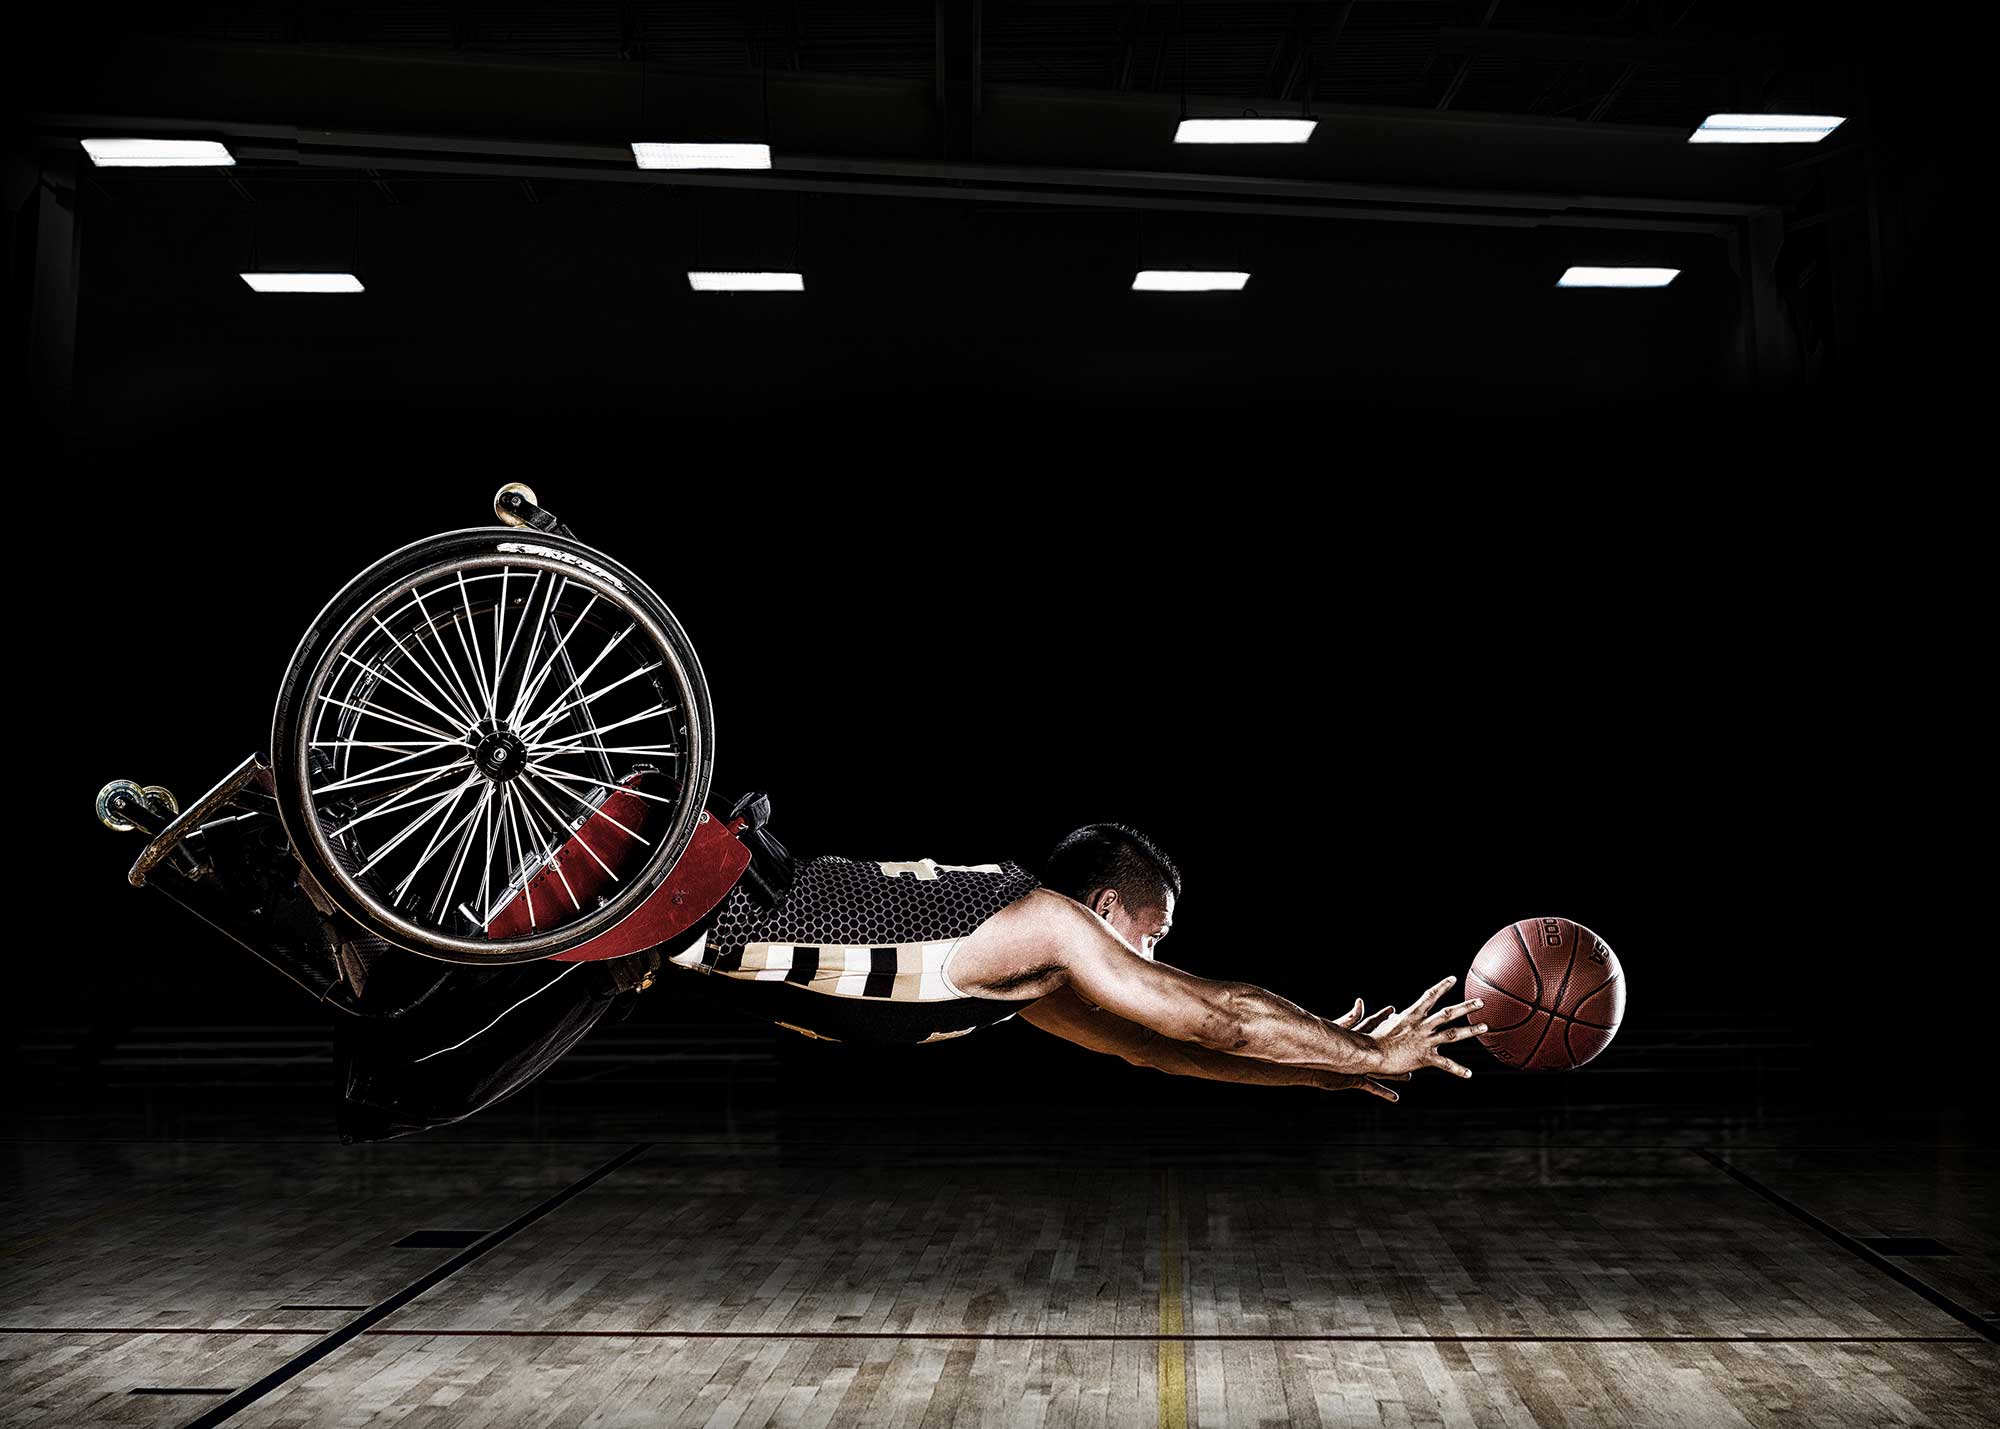 A RIC Hornets wheelchair basketball team member reaches for a basketball. These images were created for the Rehabilitation Institute of Chicago's Adaptive Sports Program.